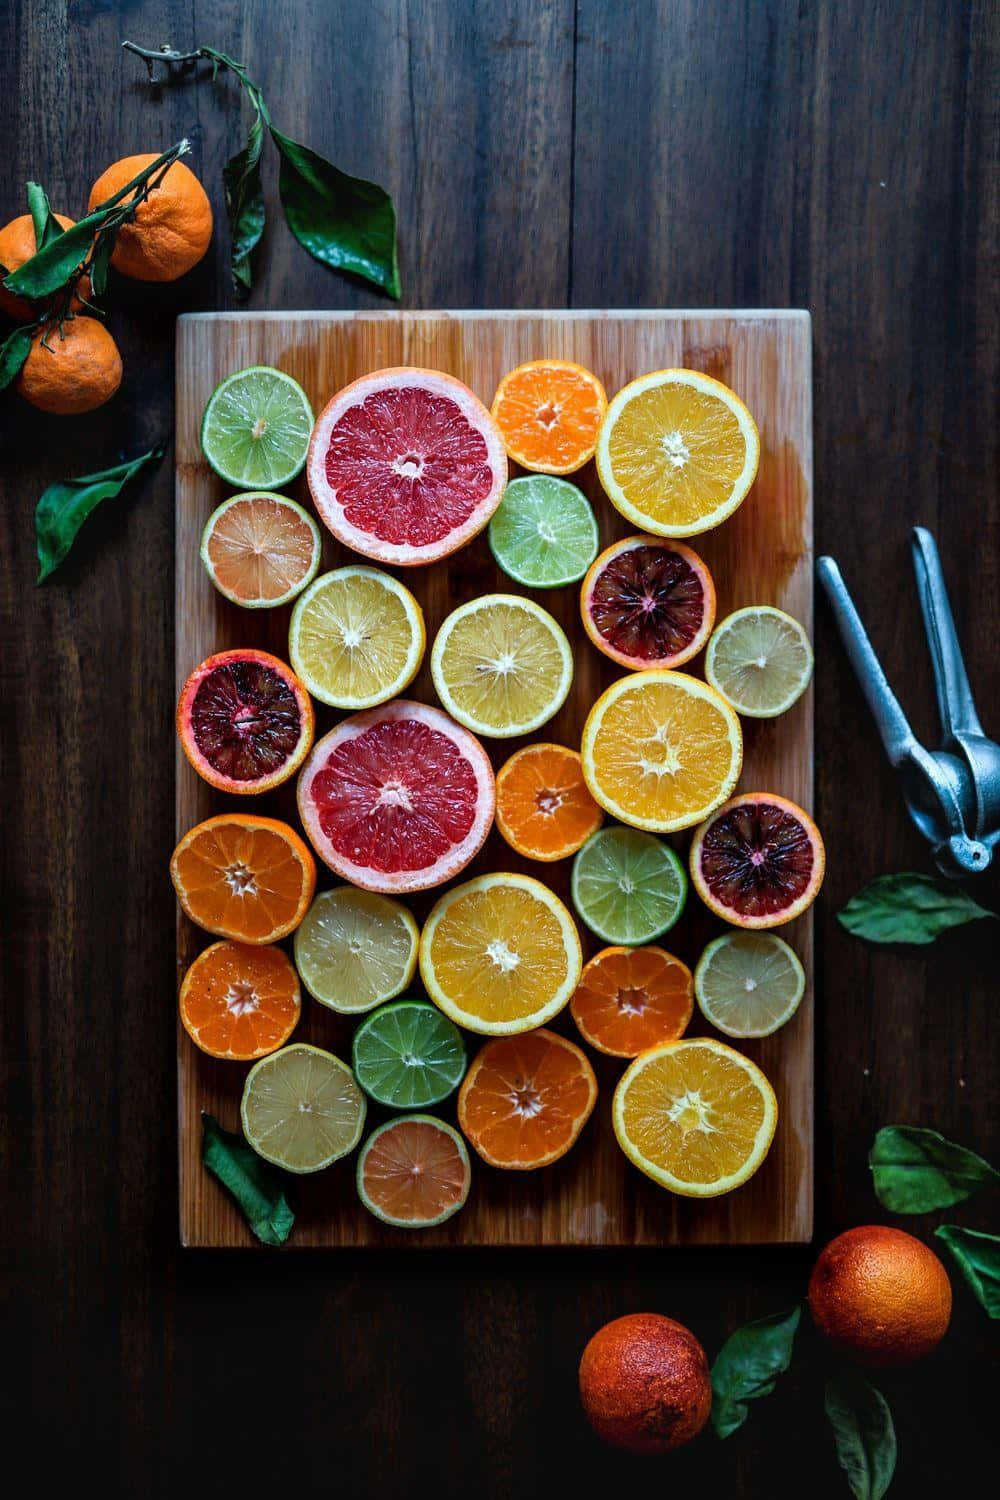 Healthy Food Citrus Fruit Slices On Wood Picture